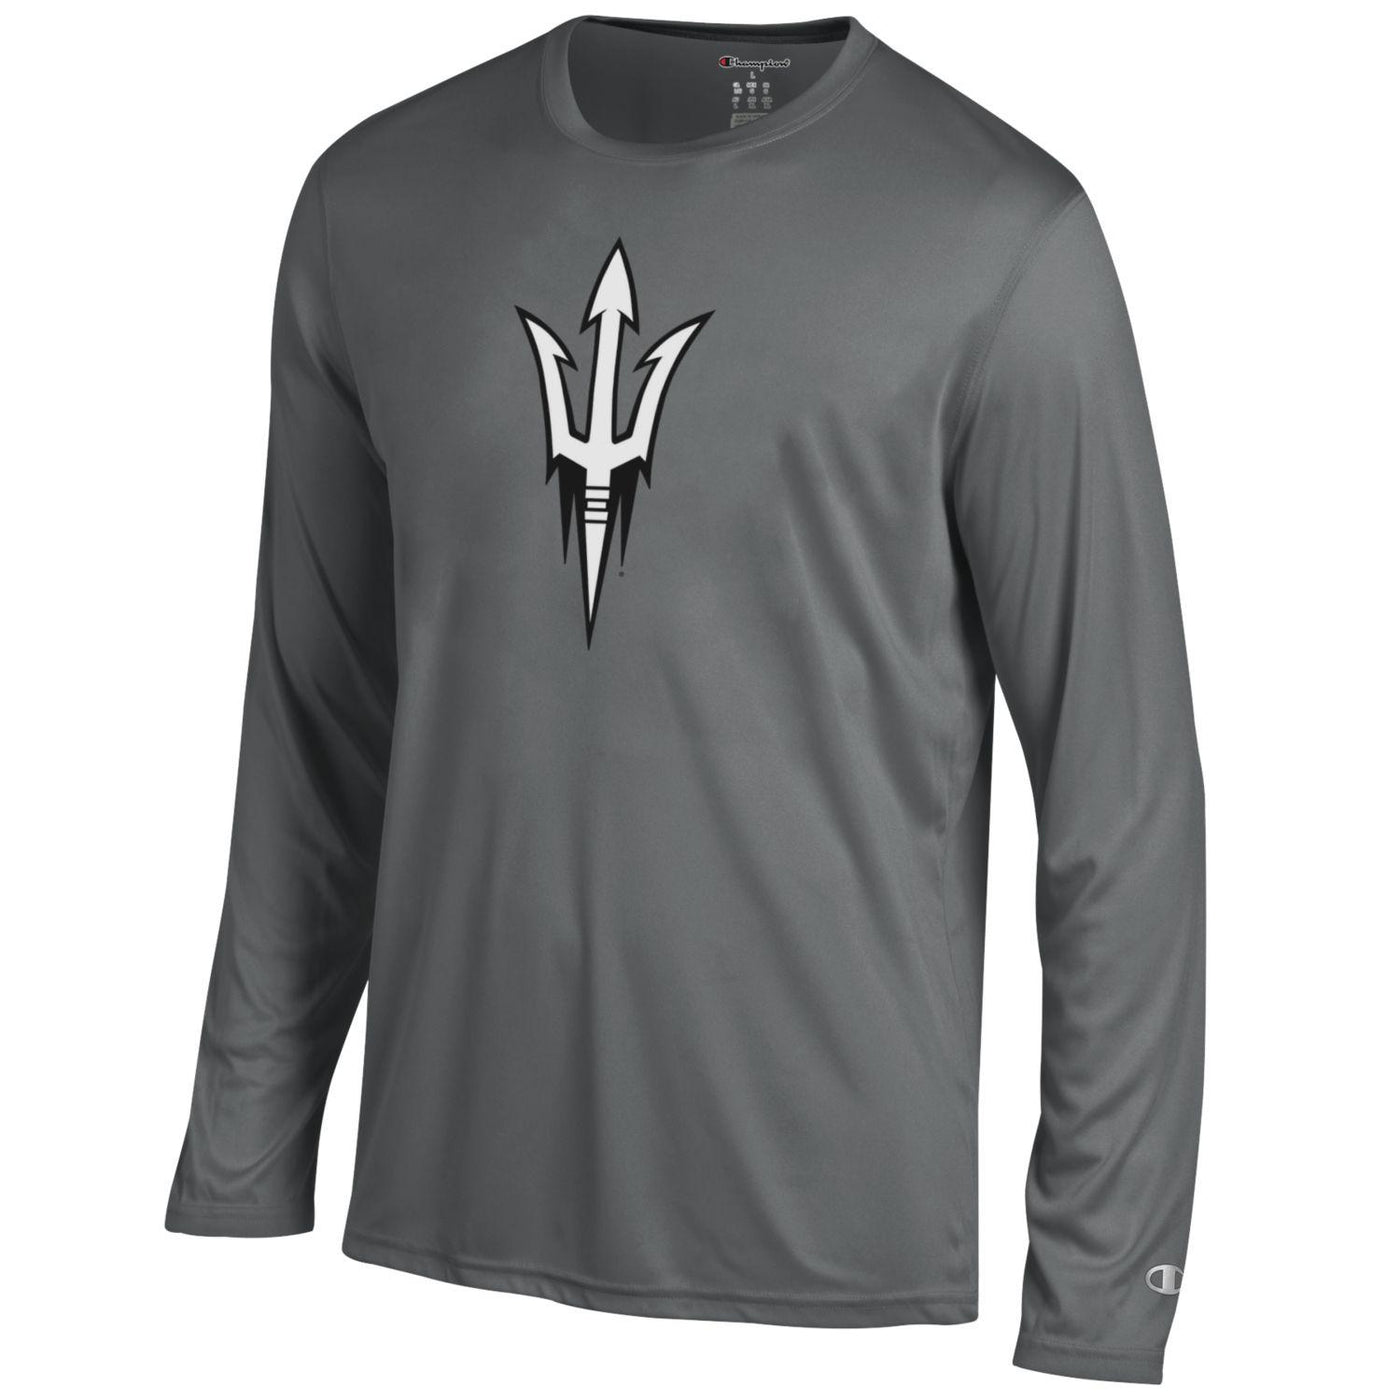 ASU gray athletic long sleeve tee with pitchfork in white and black